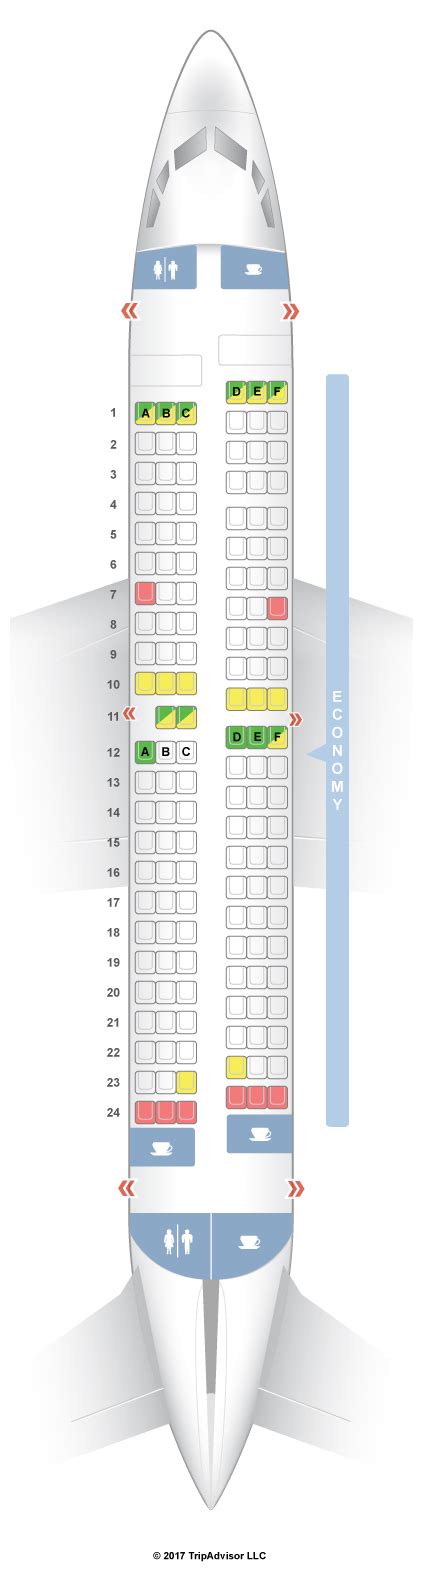 southwest boeing 737 700 seating chart